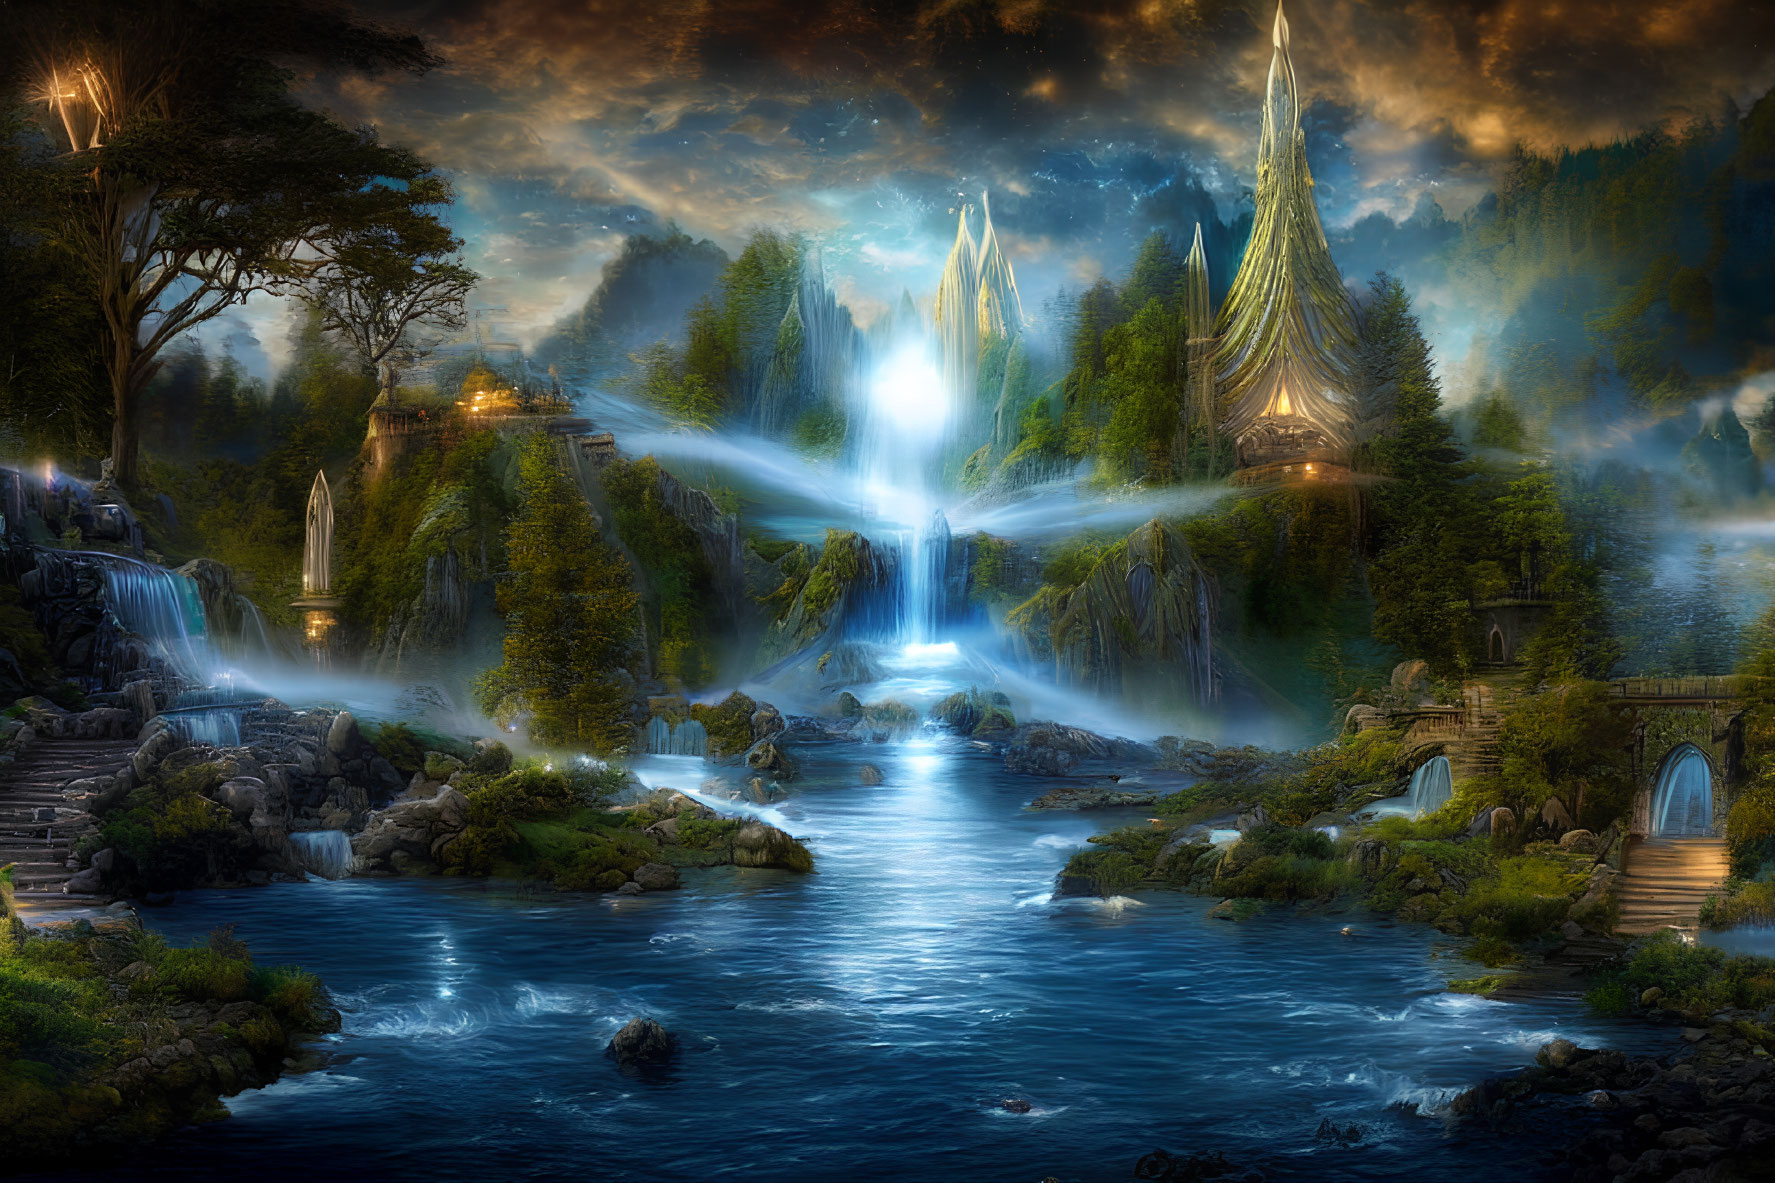 Majestic waterfalls, serene river, mystical structures in fantasy landscape